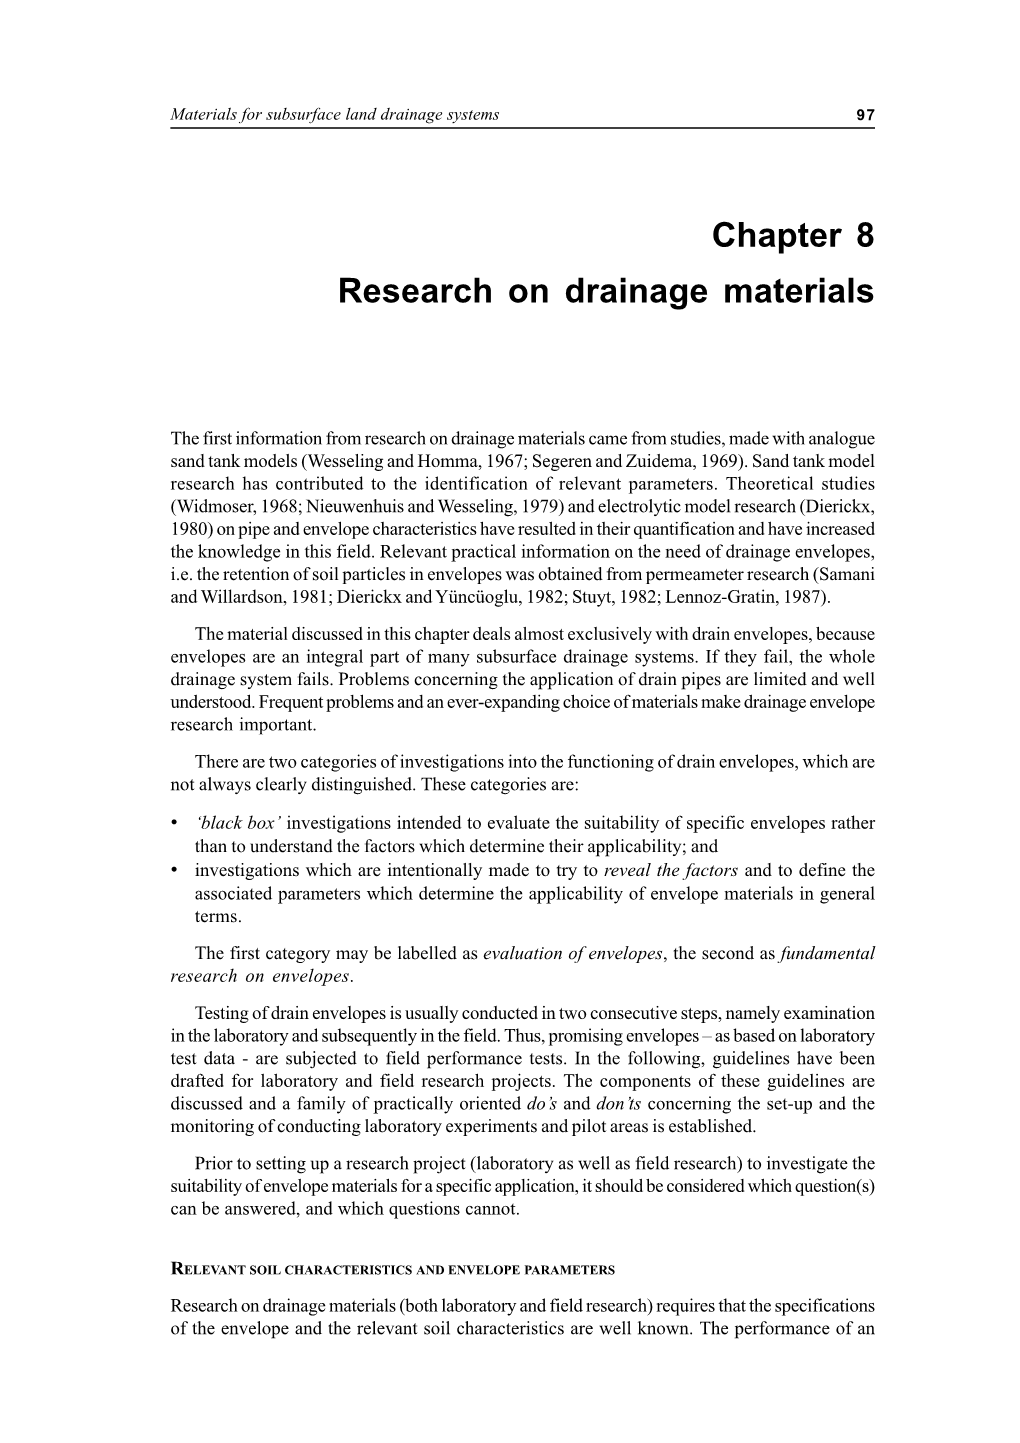 Chapter 8 Research on Drainage Materials